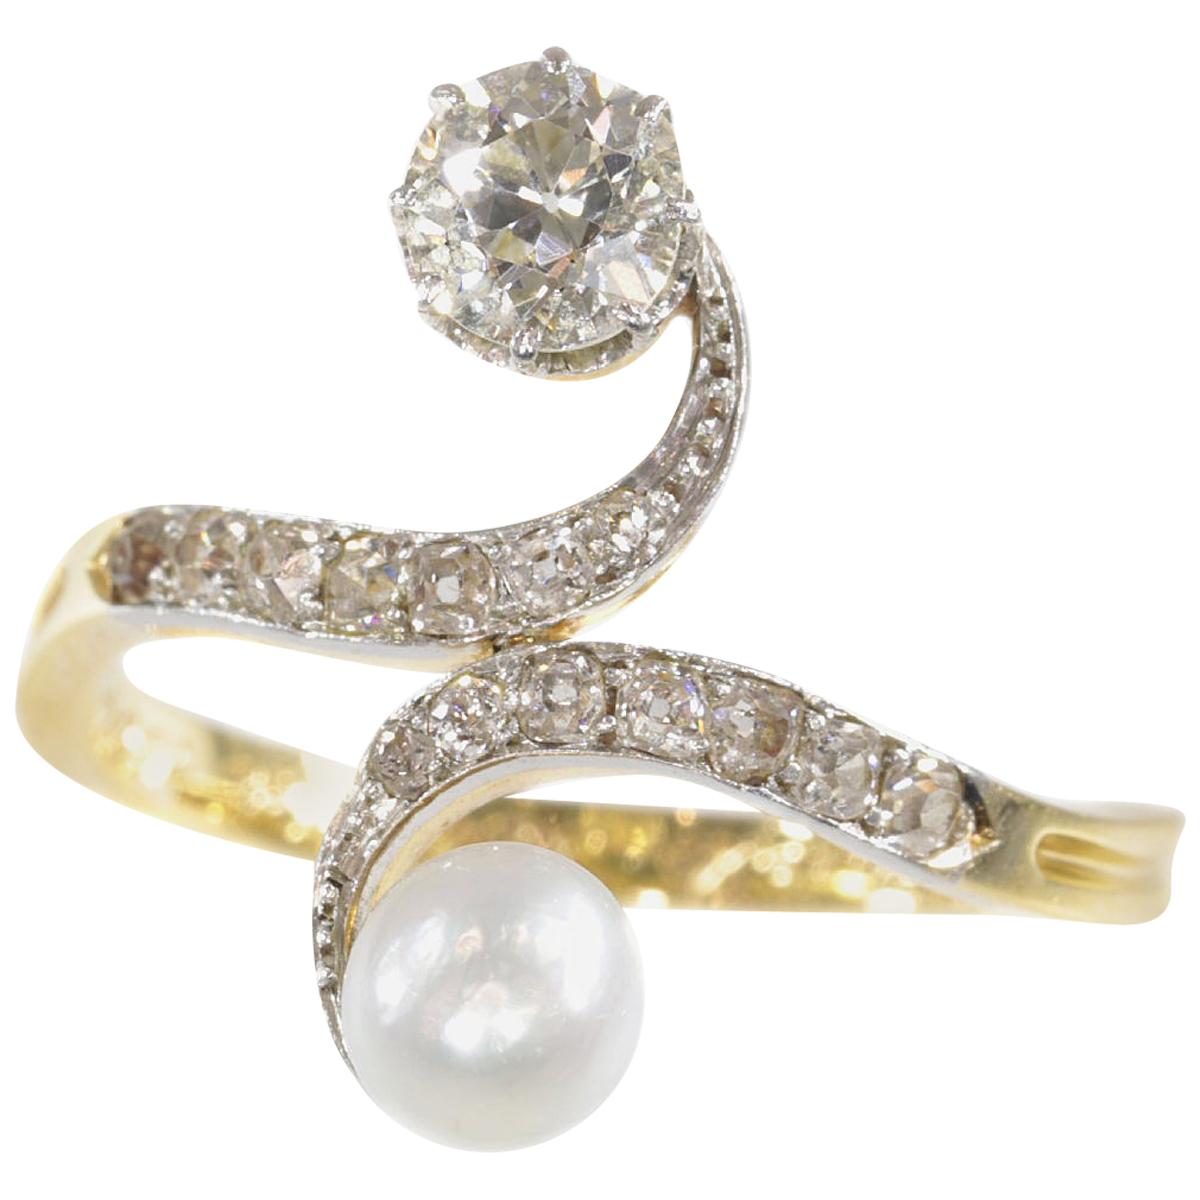 Elegant Belle Epoque Diamond and Pearl Engagement Ring so Called Toi et Moi For Sale